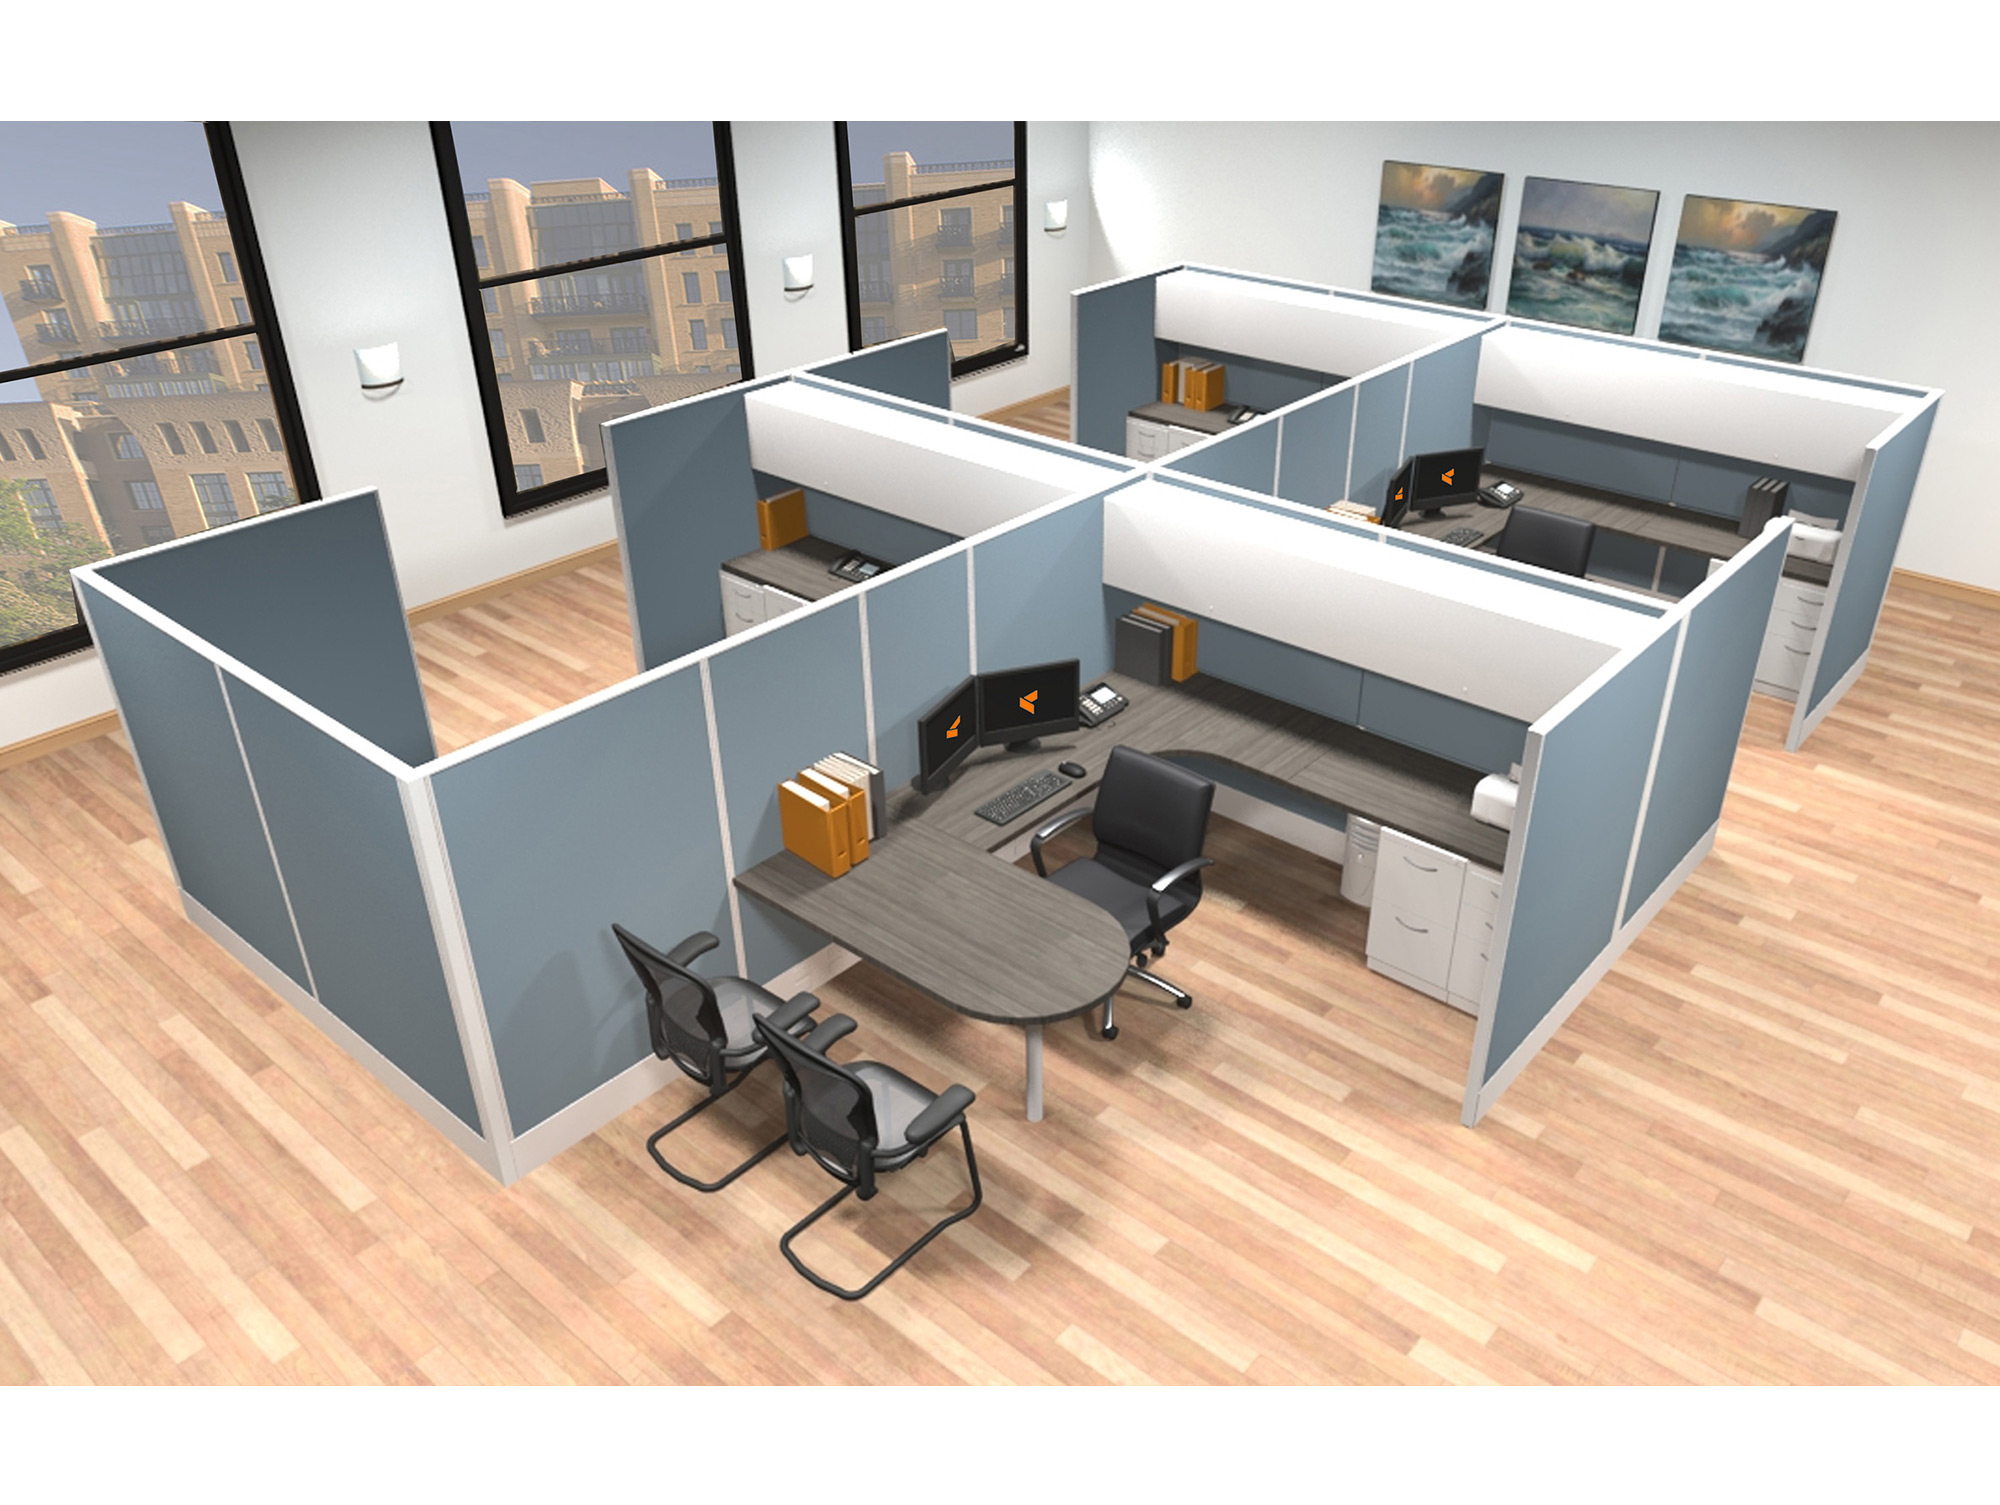 8x12 modular workstations from AIS - 6 Pack Cluster